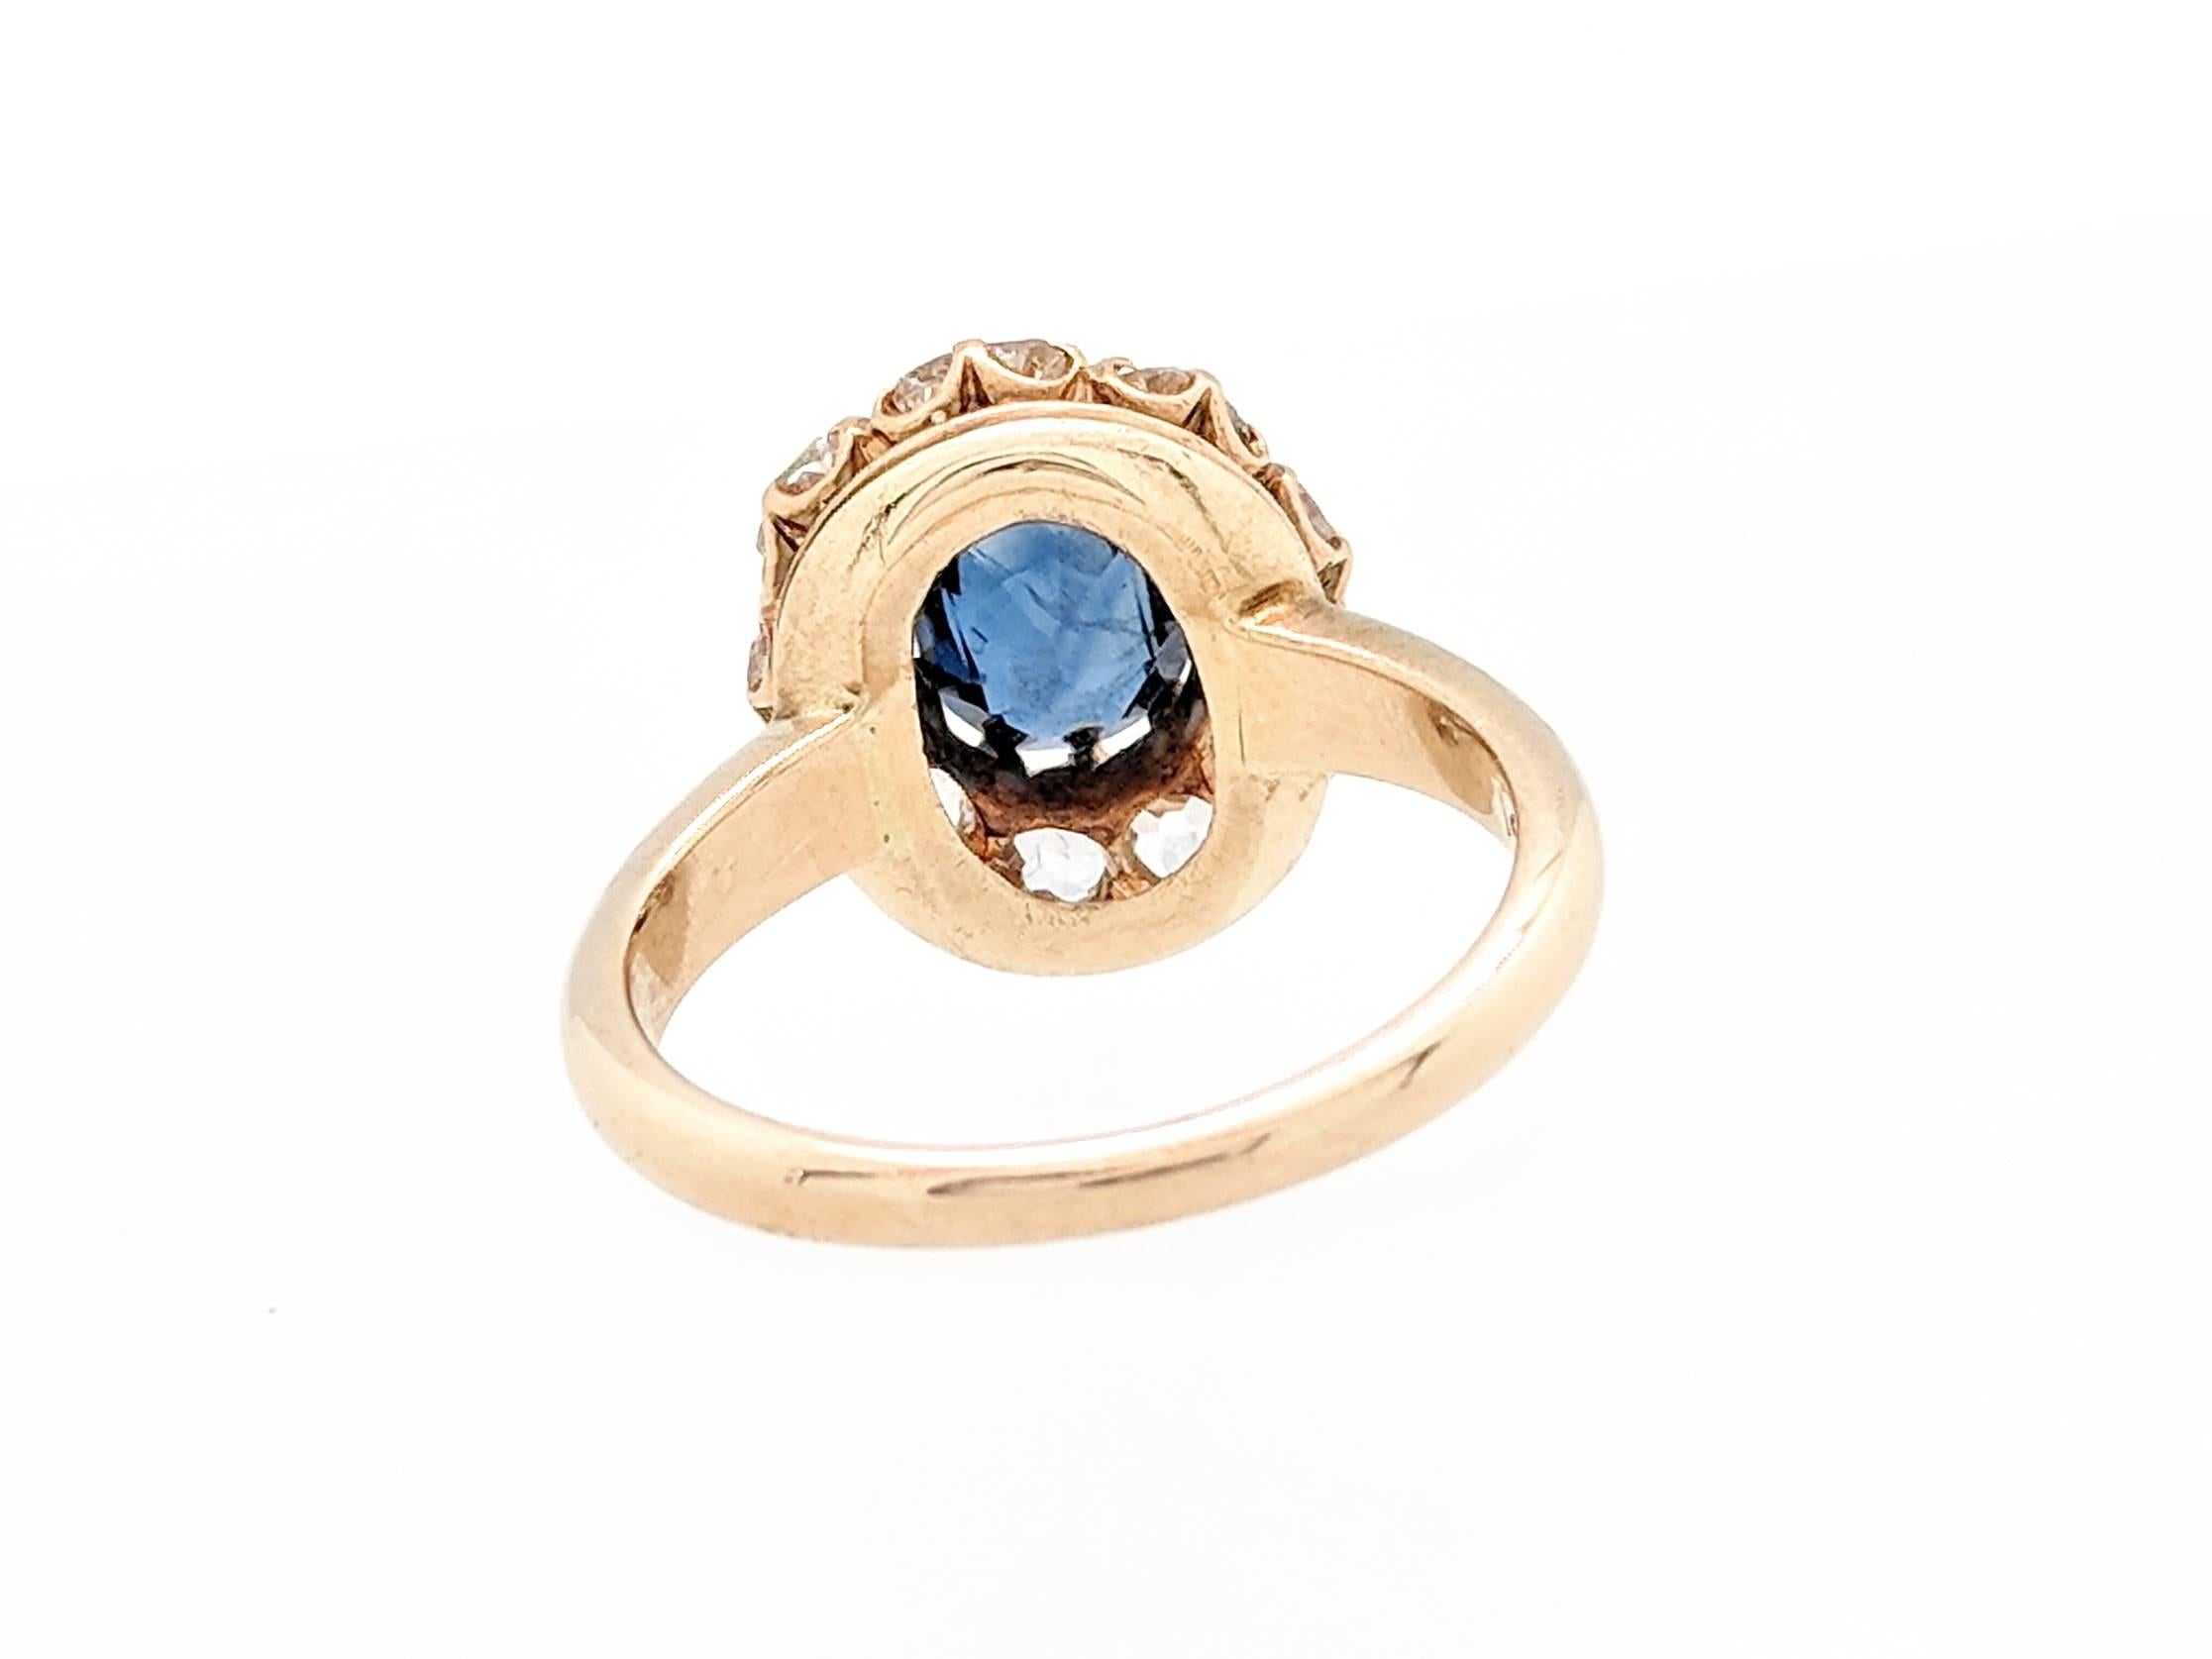 14 Karat Yellow Gold 2.35 Carat Sapphire and Diamond Estate Ring In Excellent Condition For Sale In Gainesville, FL